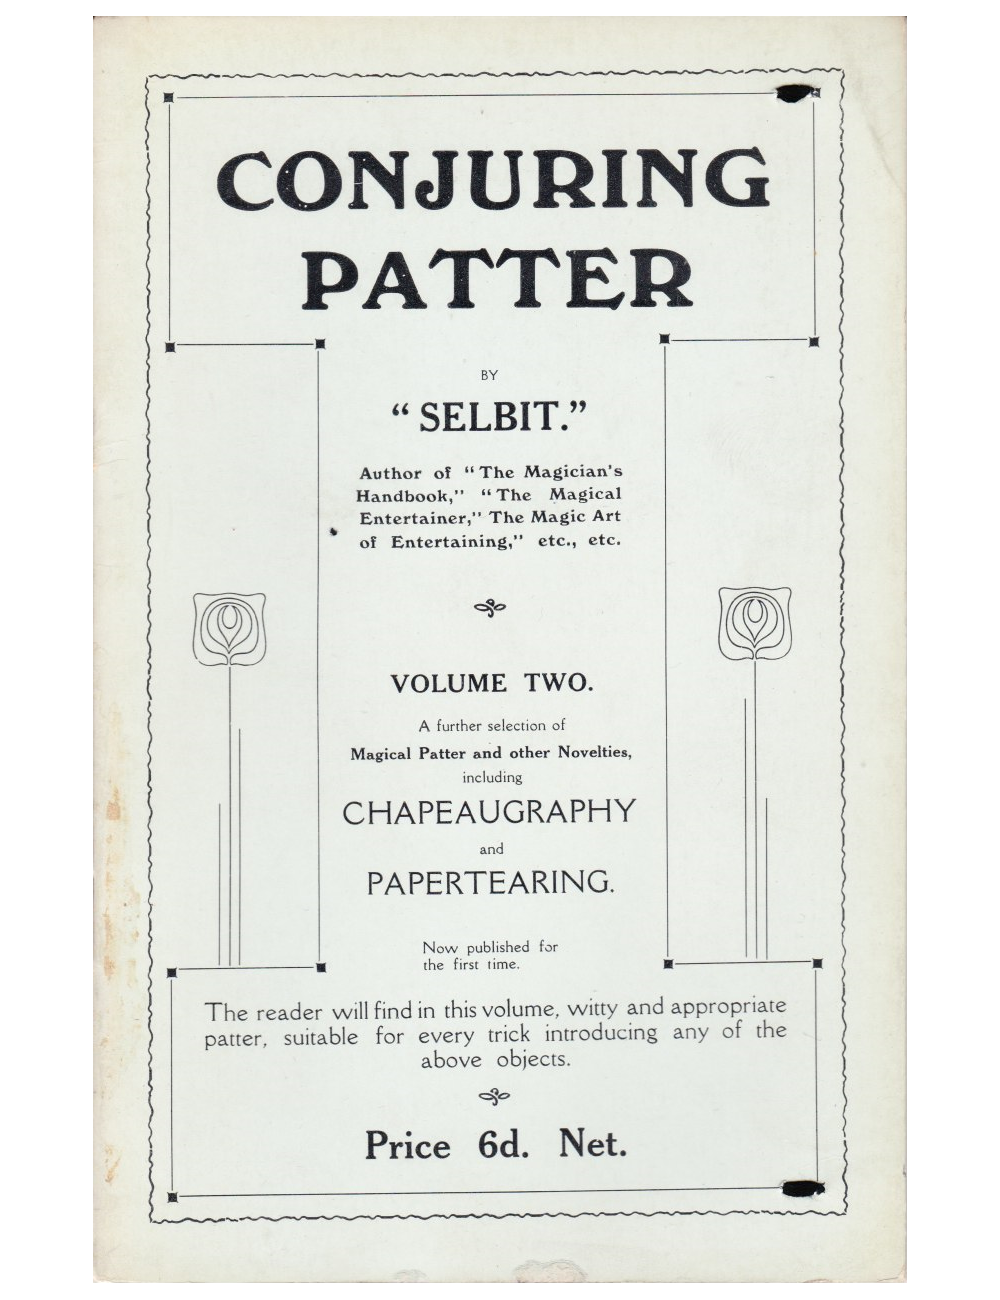 CONJURING PATTER BY SELBIT VOLUME TWO